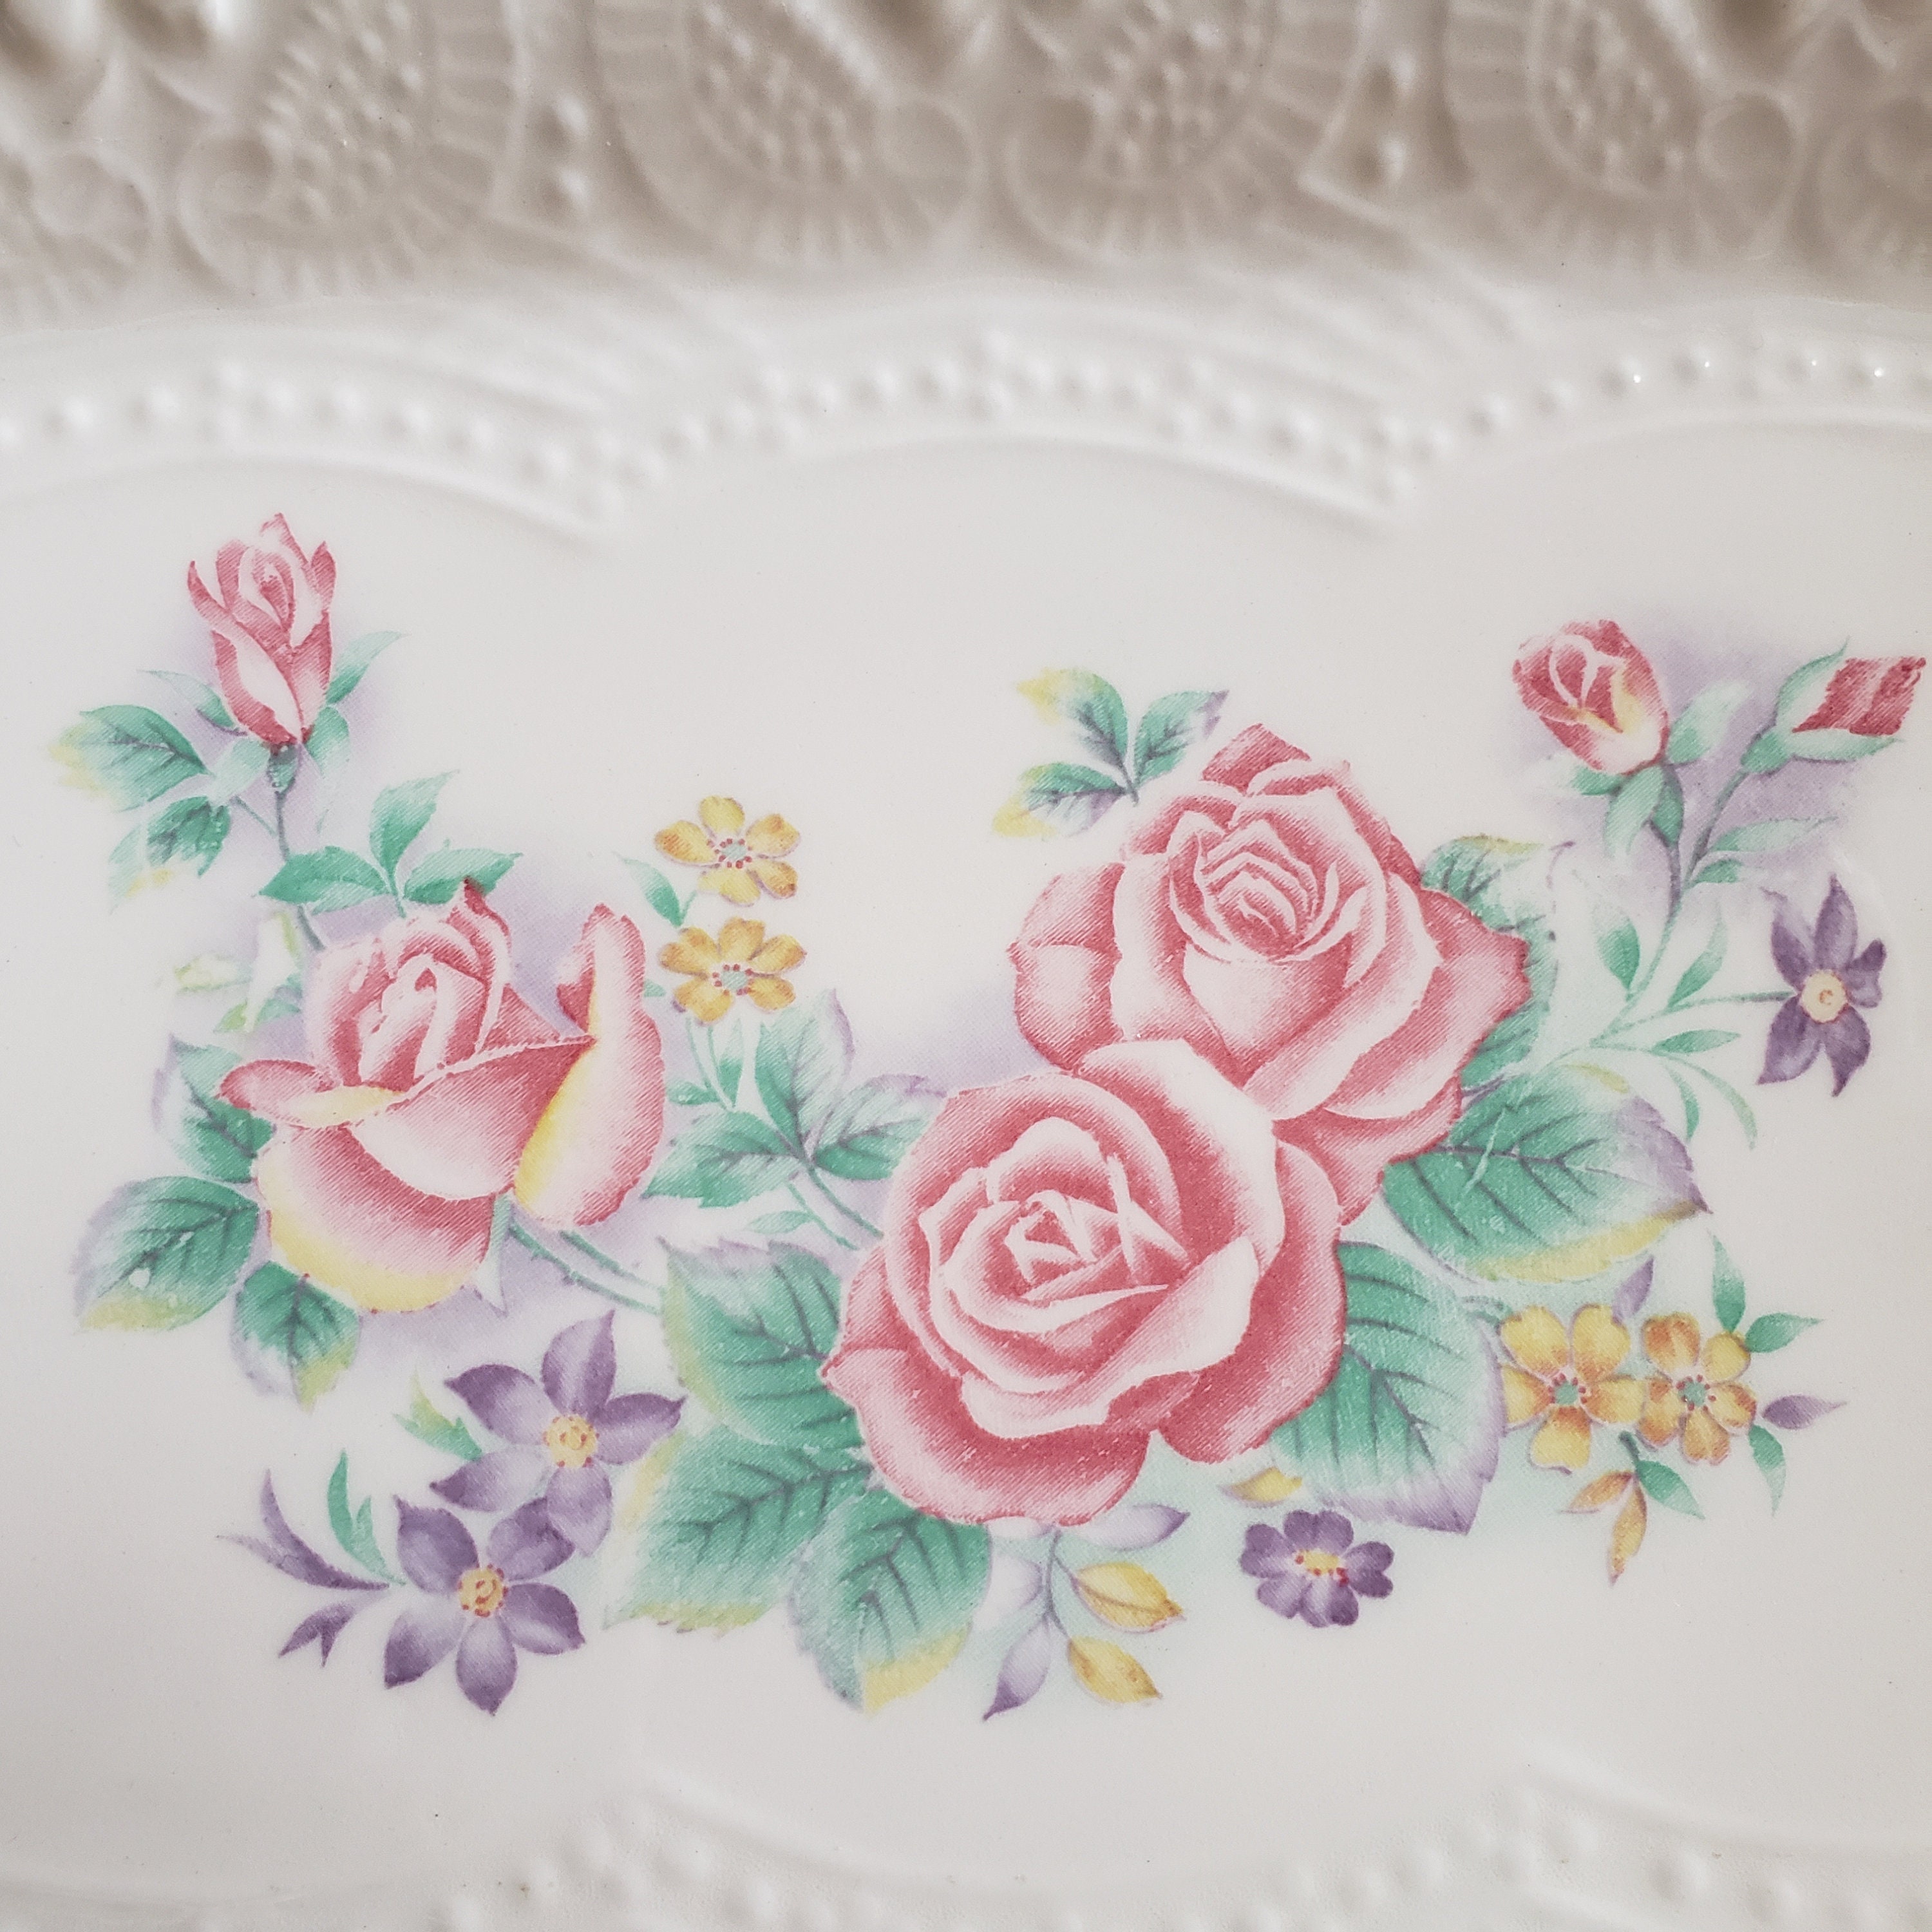 Retro Metal Snack Trays 12PC Set, Yellow With Pink Flower Roses